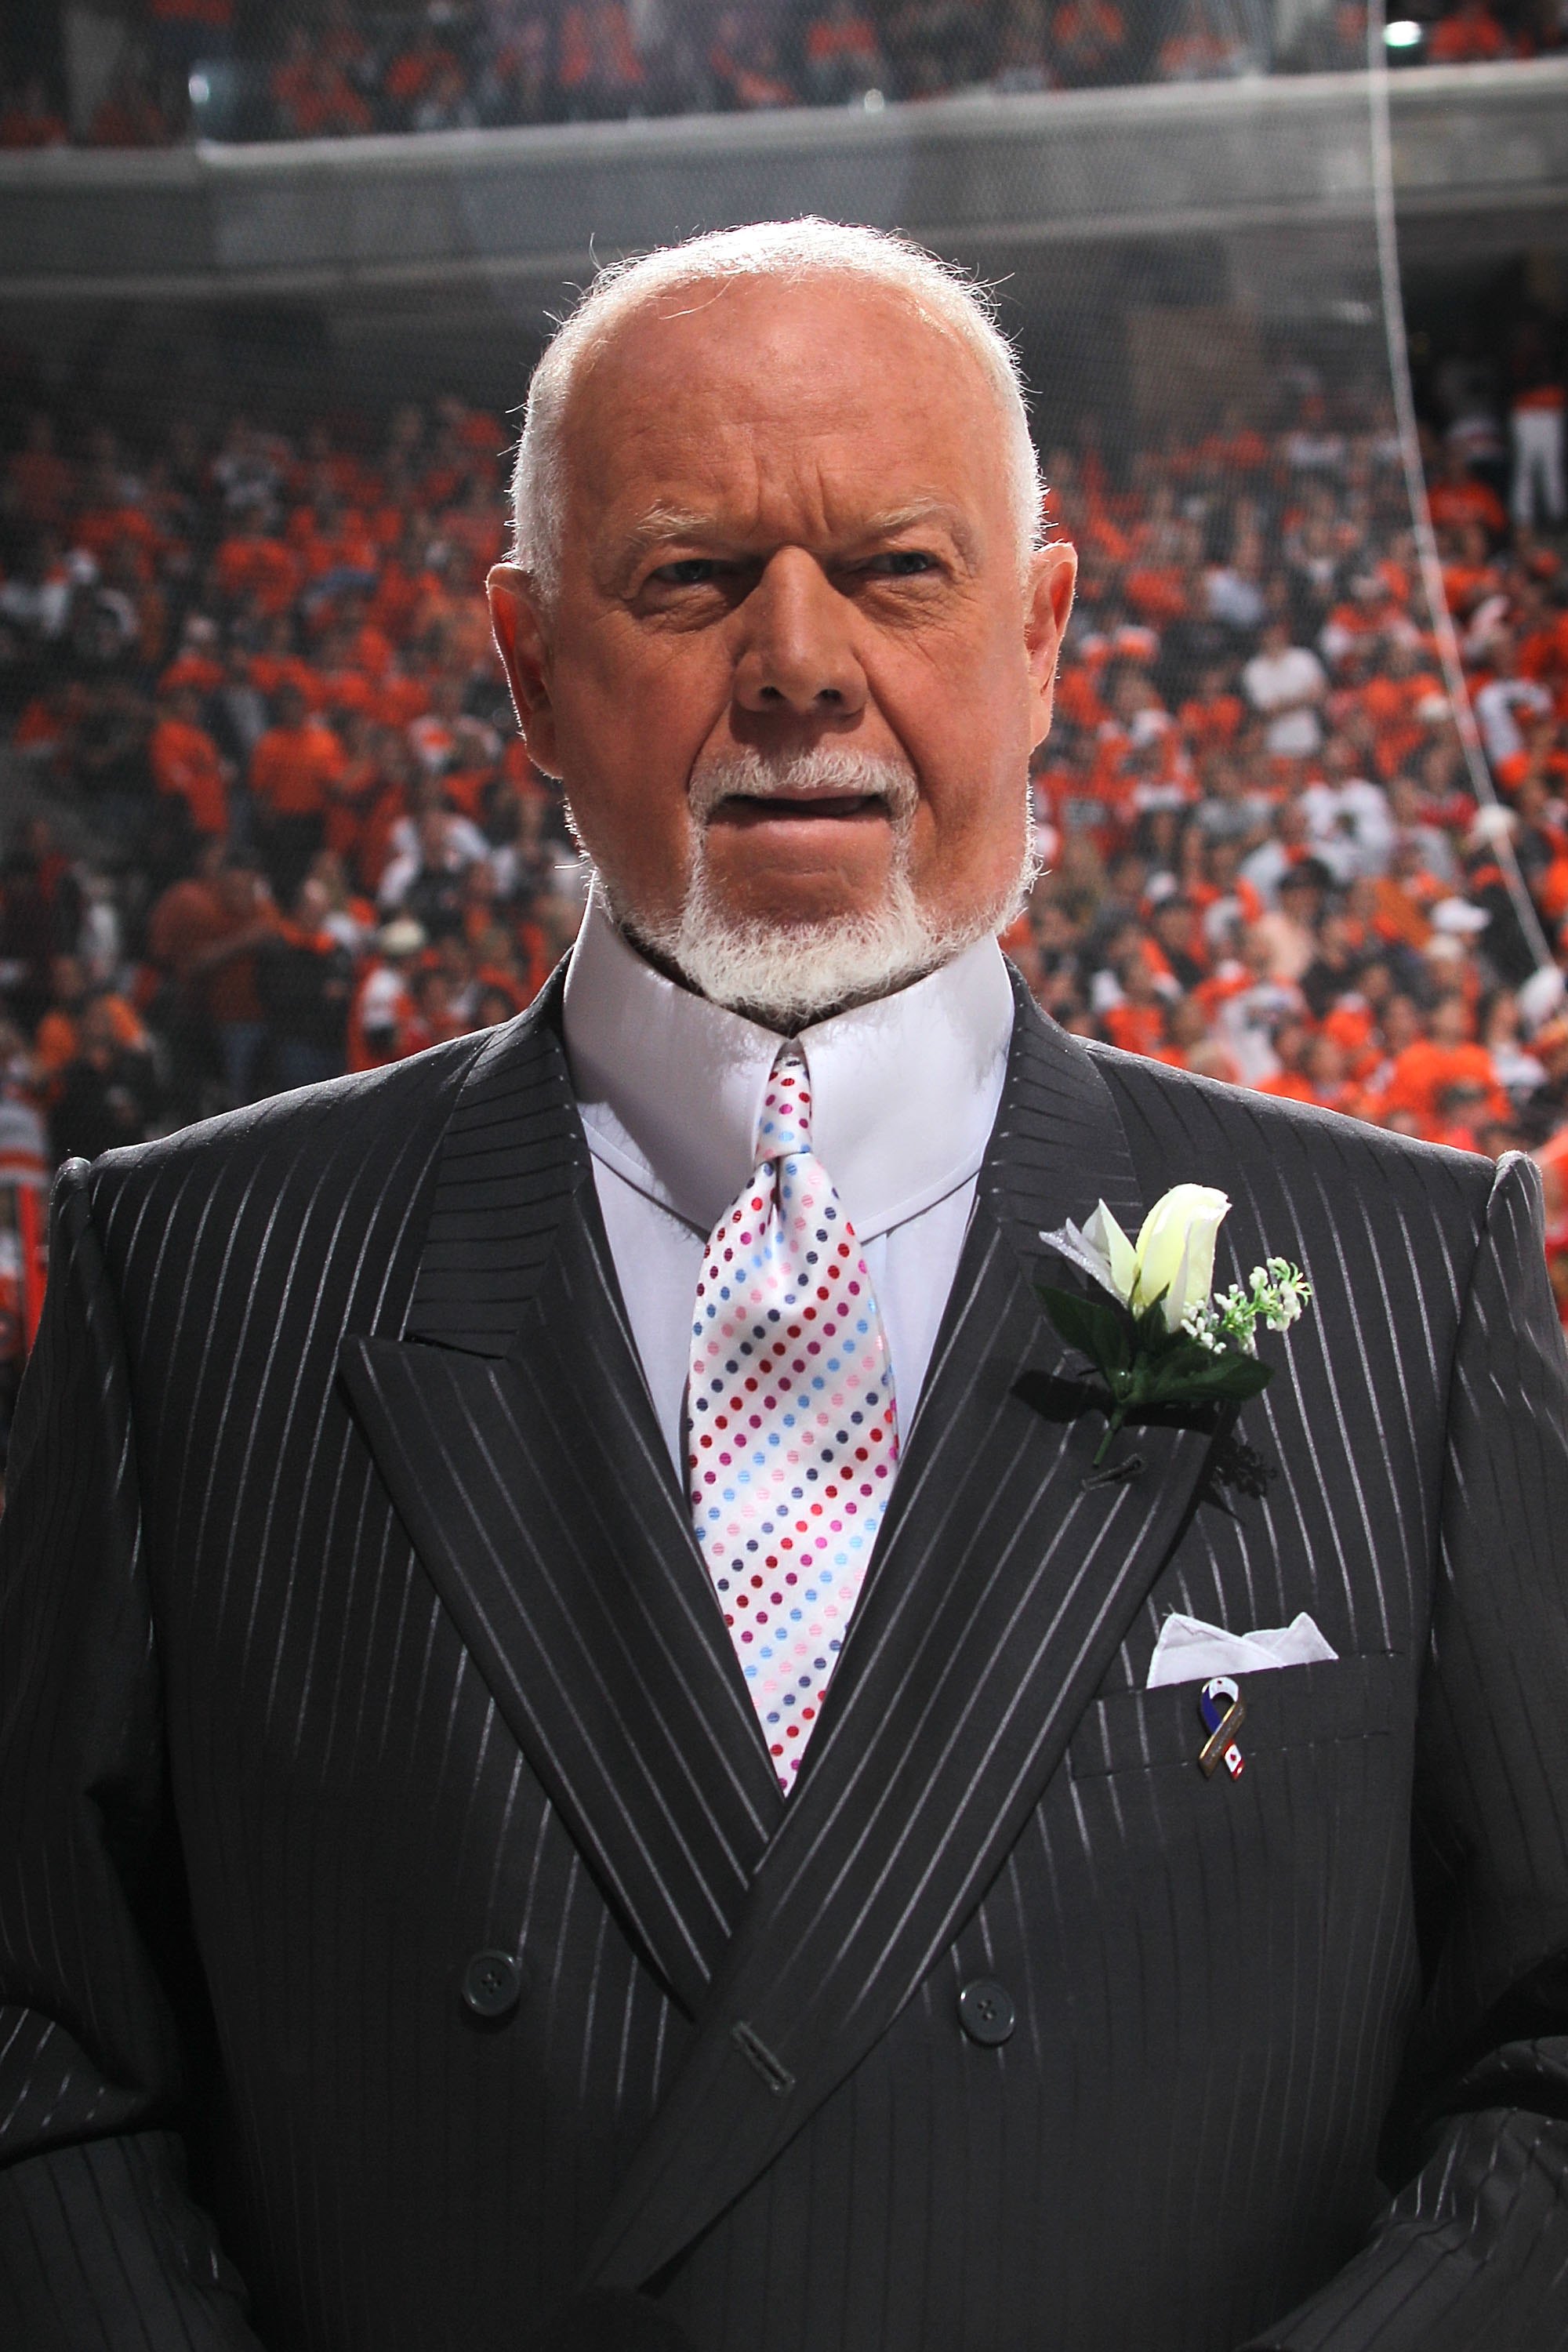 PHILADELPHIA - JUNE 09:  CBC sportscaster Don Cherry reports before Game Six of the 2010 NHL Stanley Cup Final between the Chicago Blackhawks and the Philadelphia Flyers at the Wachovia Center on June 9, 2010 in Philadelphia, Pennsylvania.  (Photo by Bruc